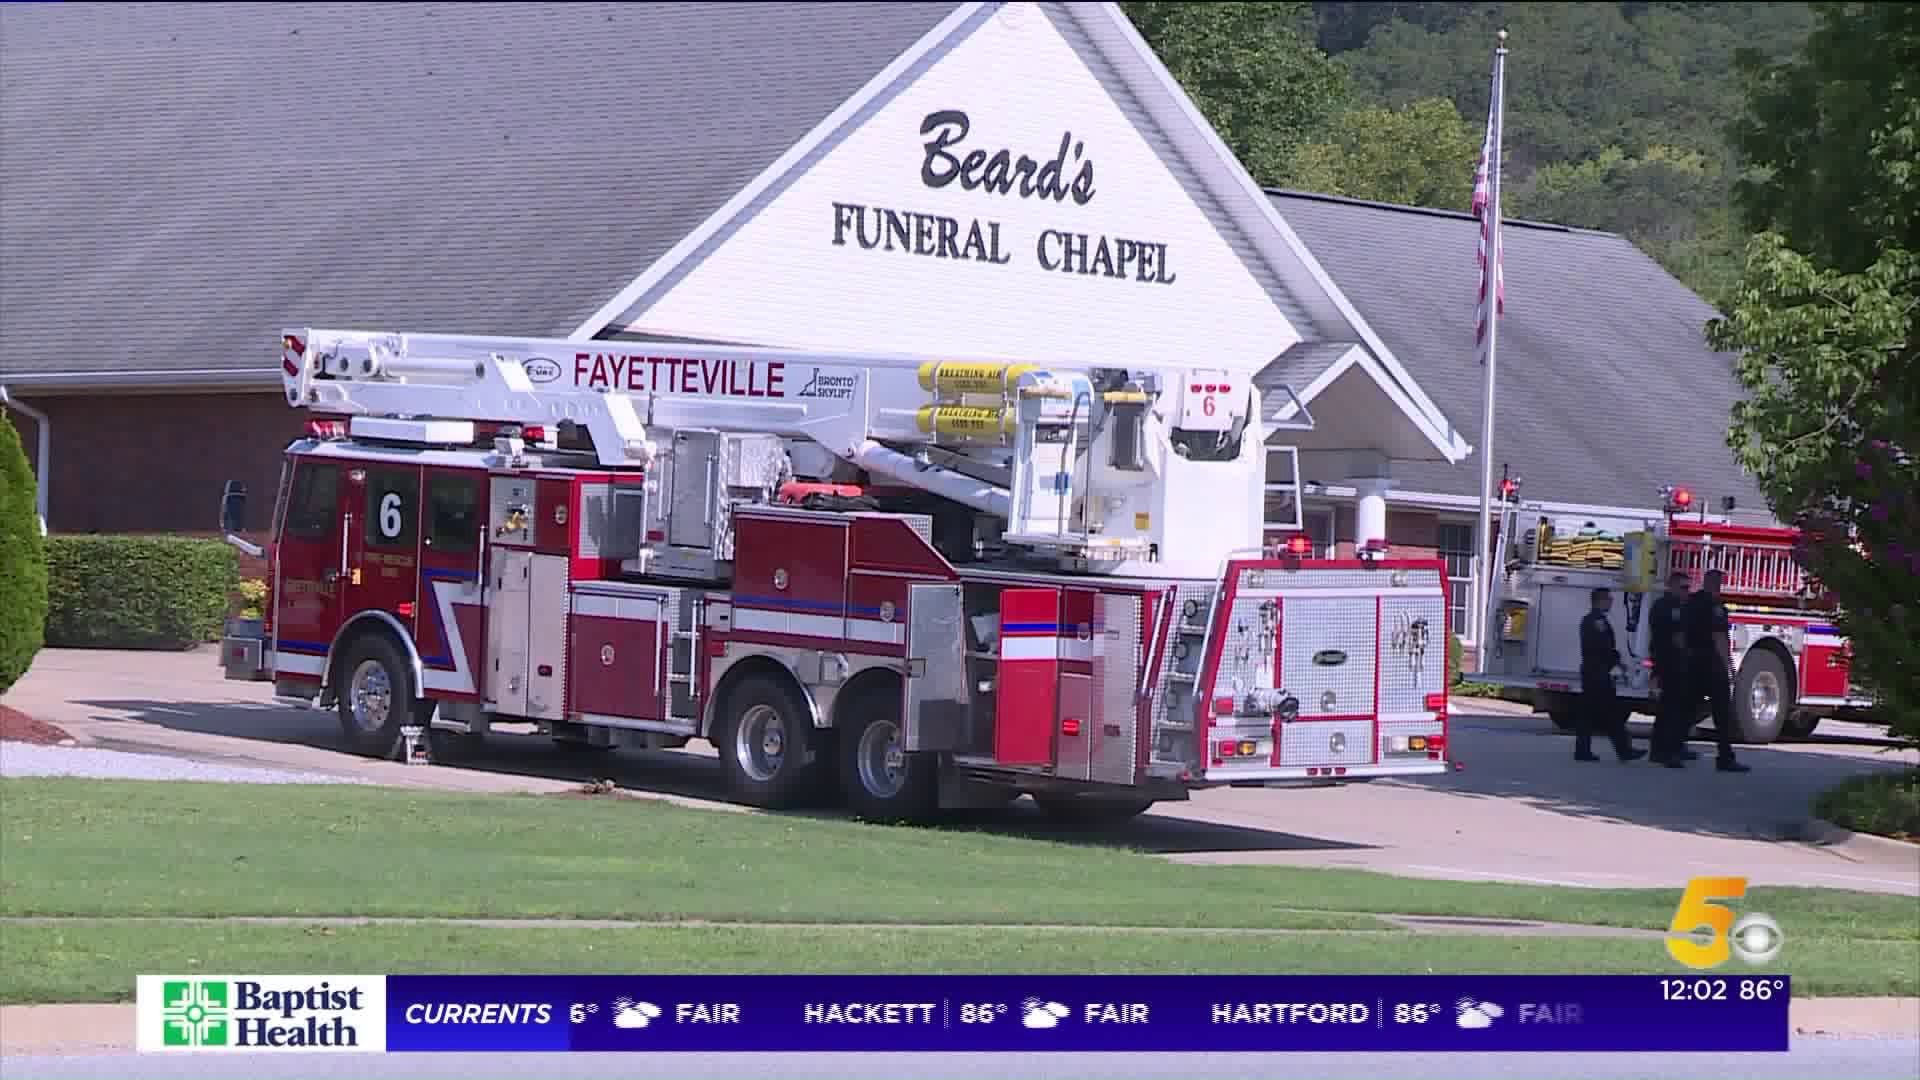 Firefighters Respond To Fire At Funeral Chapel In Fayetteville